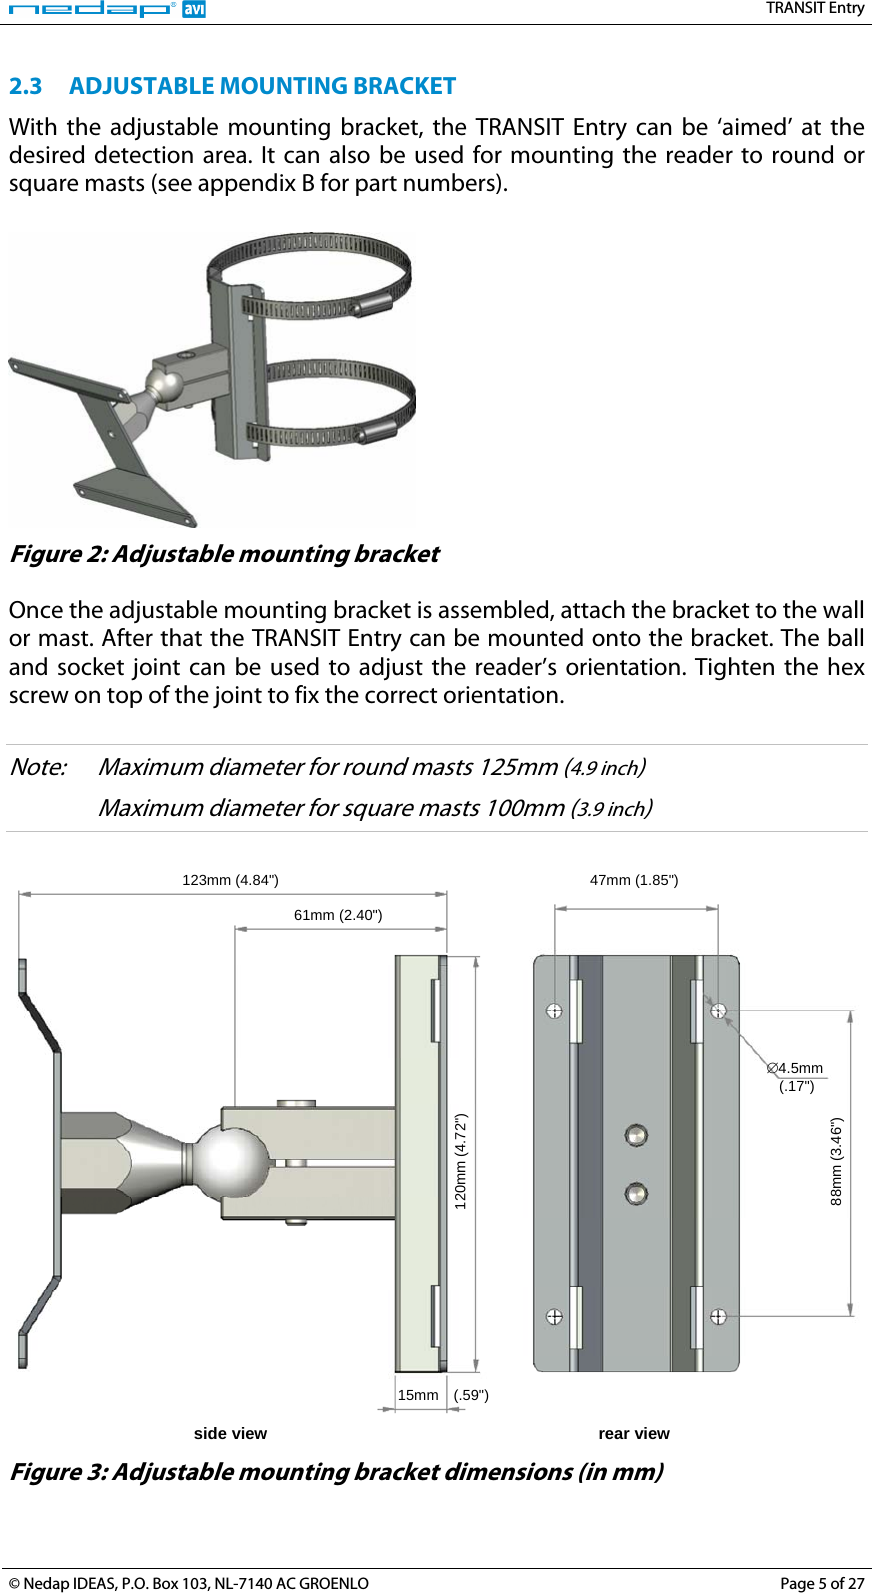   TRANSIT Entry 2.3 ADJUSTABLE MOUNTING BRACKET With the adjustable mounting bracket, the TRANSIT Entry can be ‘aimed’ at the desired detection area. It can also be used for mounting the reader to round or square masts (see appendix B for part numbers).   Figure 2: Adjustable mounting bracket  Once the adjustable mounting bracket is assembled, attach the bracket to the wall or mast. After that the TRANSIT Entry can be mounted onto the bracket. The ball and socket joint can be used to adjust the reader’s orientation. Tighten the hex screw on top of the joint to fix the correct orientation.  Note:  Maximum diameter for round masts 125mm (4.9 inch)    Maximum diameter for square masts 100mm (3.9 inch)   123mm (4.84&quot;)  47mm (1.85&quot;) 61mm (2.40&quot;) 120mm (4.72&quot;) 15mm (.59&quot;) 88mm (3.46&quot;) side view  rear view ∅4.5mm  (.17&quot;)  Figure 3: Adjustable mounting bracket dimensions (in mm) © Nedap IDEAS, P.O. Box 103, NL-7140 AC GROENLO  Page 5 of 27 